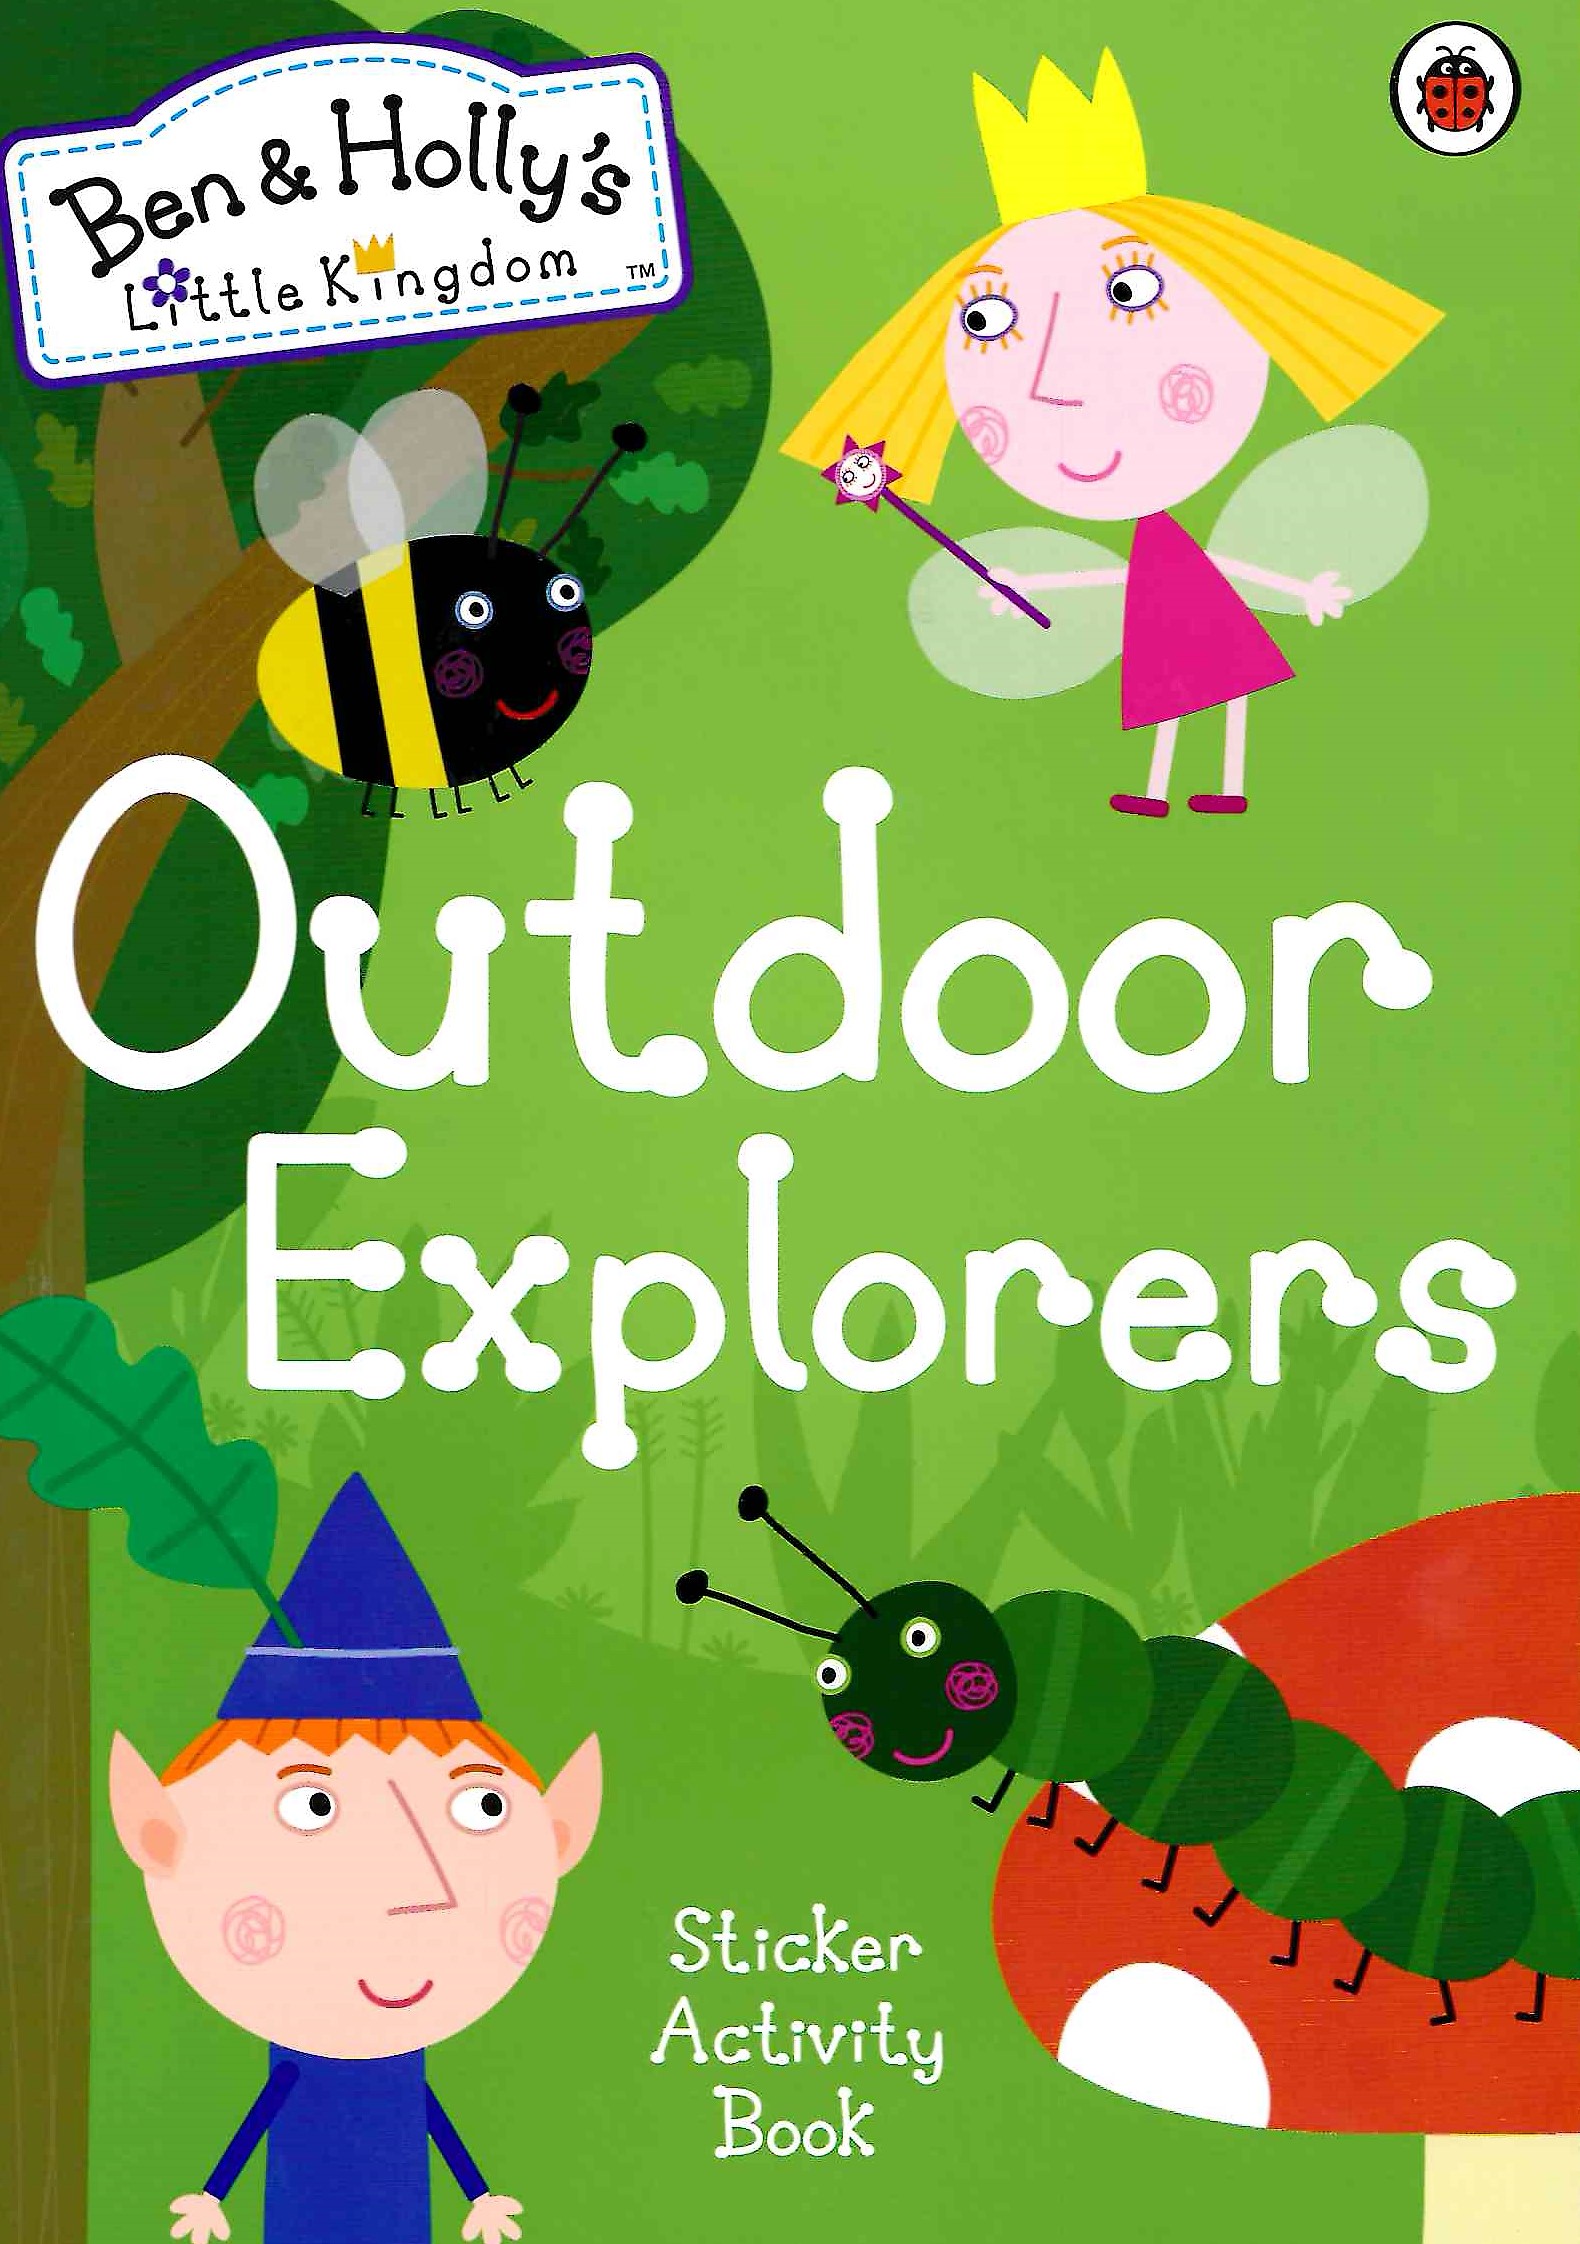 Ben and Holly's Little Kingdom: Outdoor Explorers Sticker Activity Book